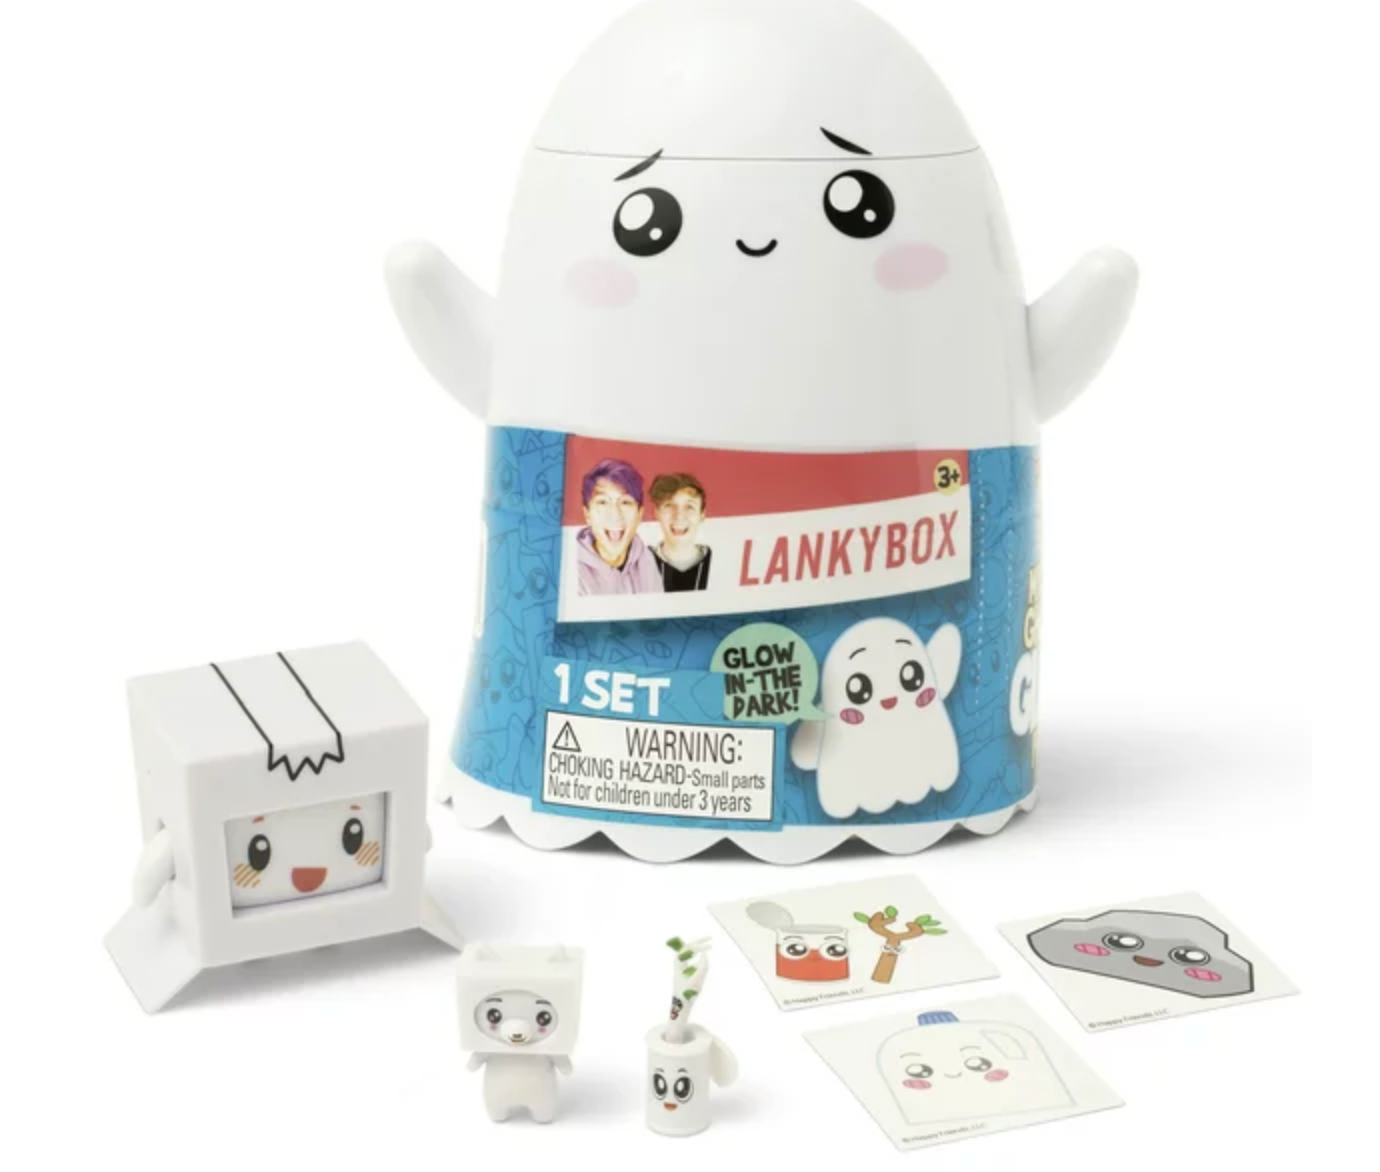 Halloween LankyBox Ghosty Glow Mystery Box Toy Figures and Stickers New